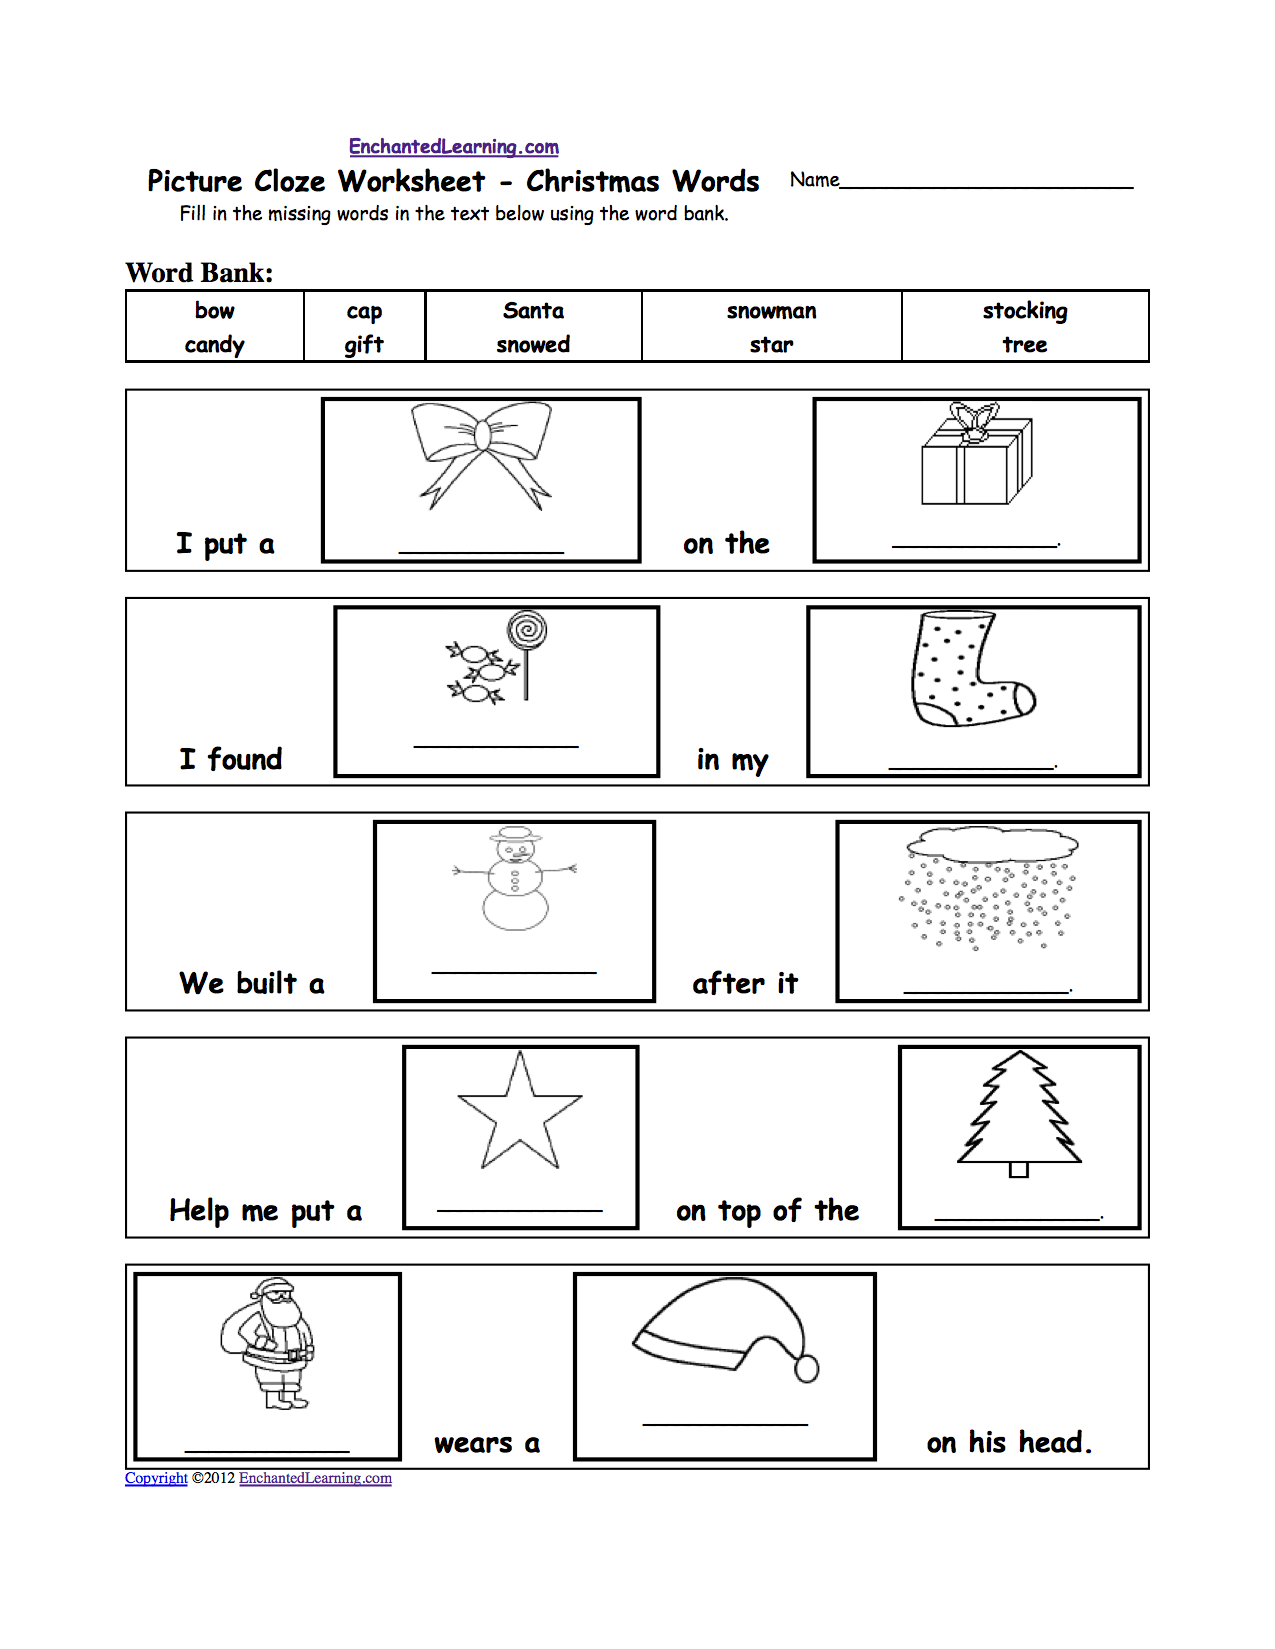 Picture Cloze Worksheet - Holiday And Seasons Words